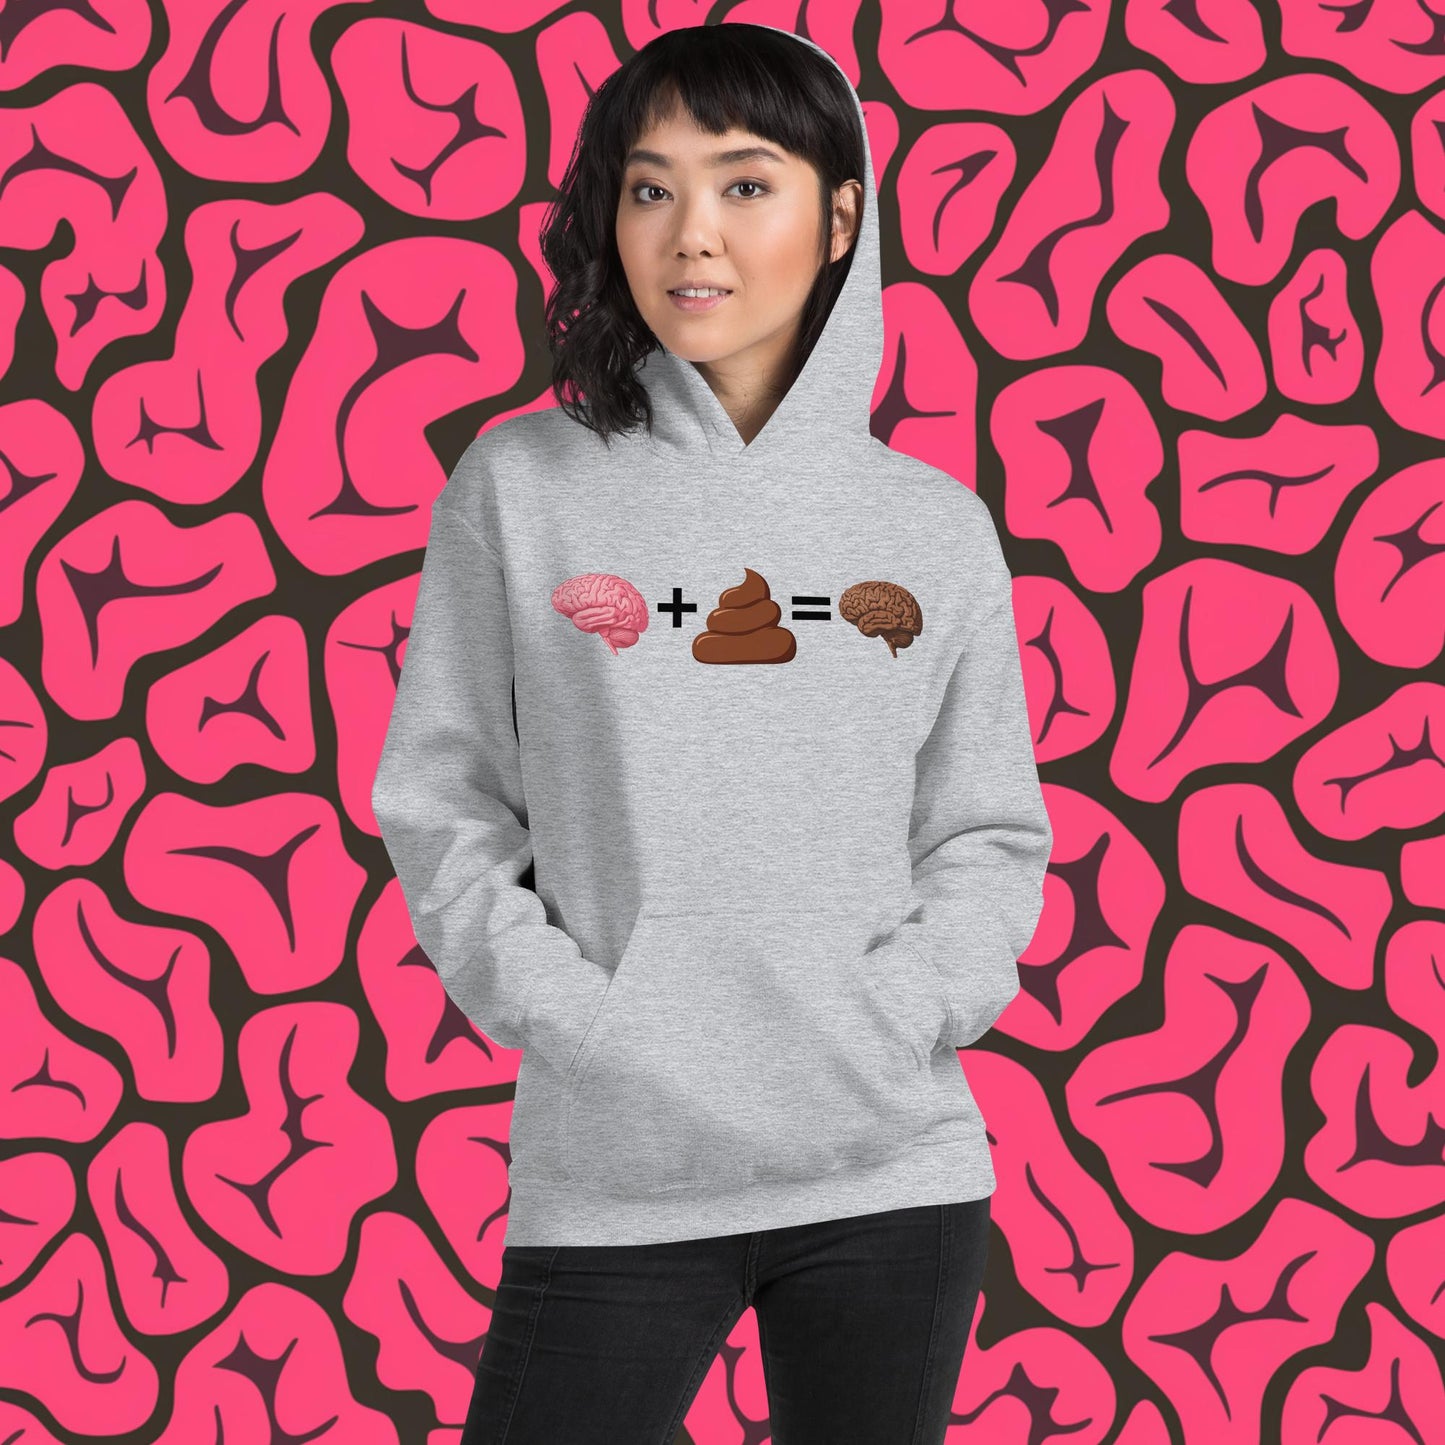 Poo for Brains Funny Math Equation Unisex Hoodie Next Cult Brand